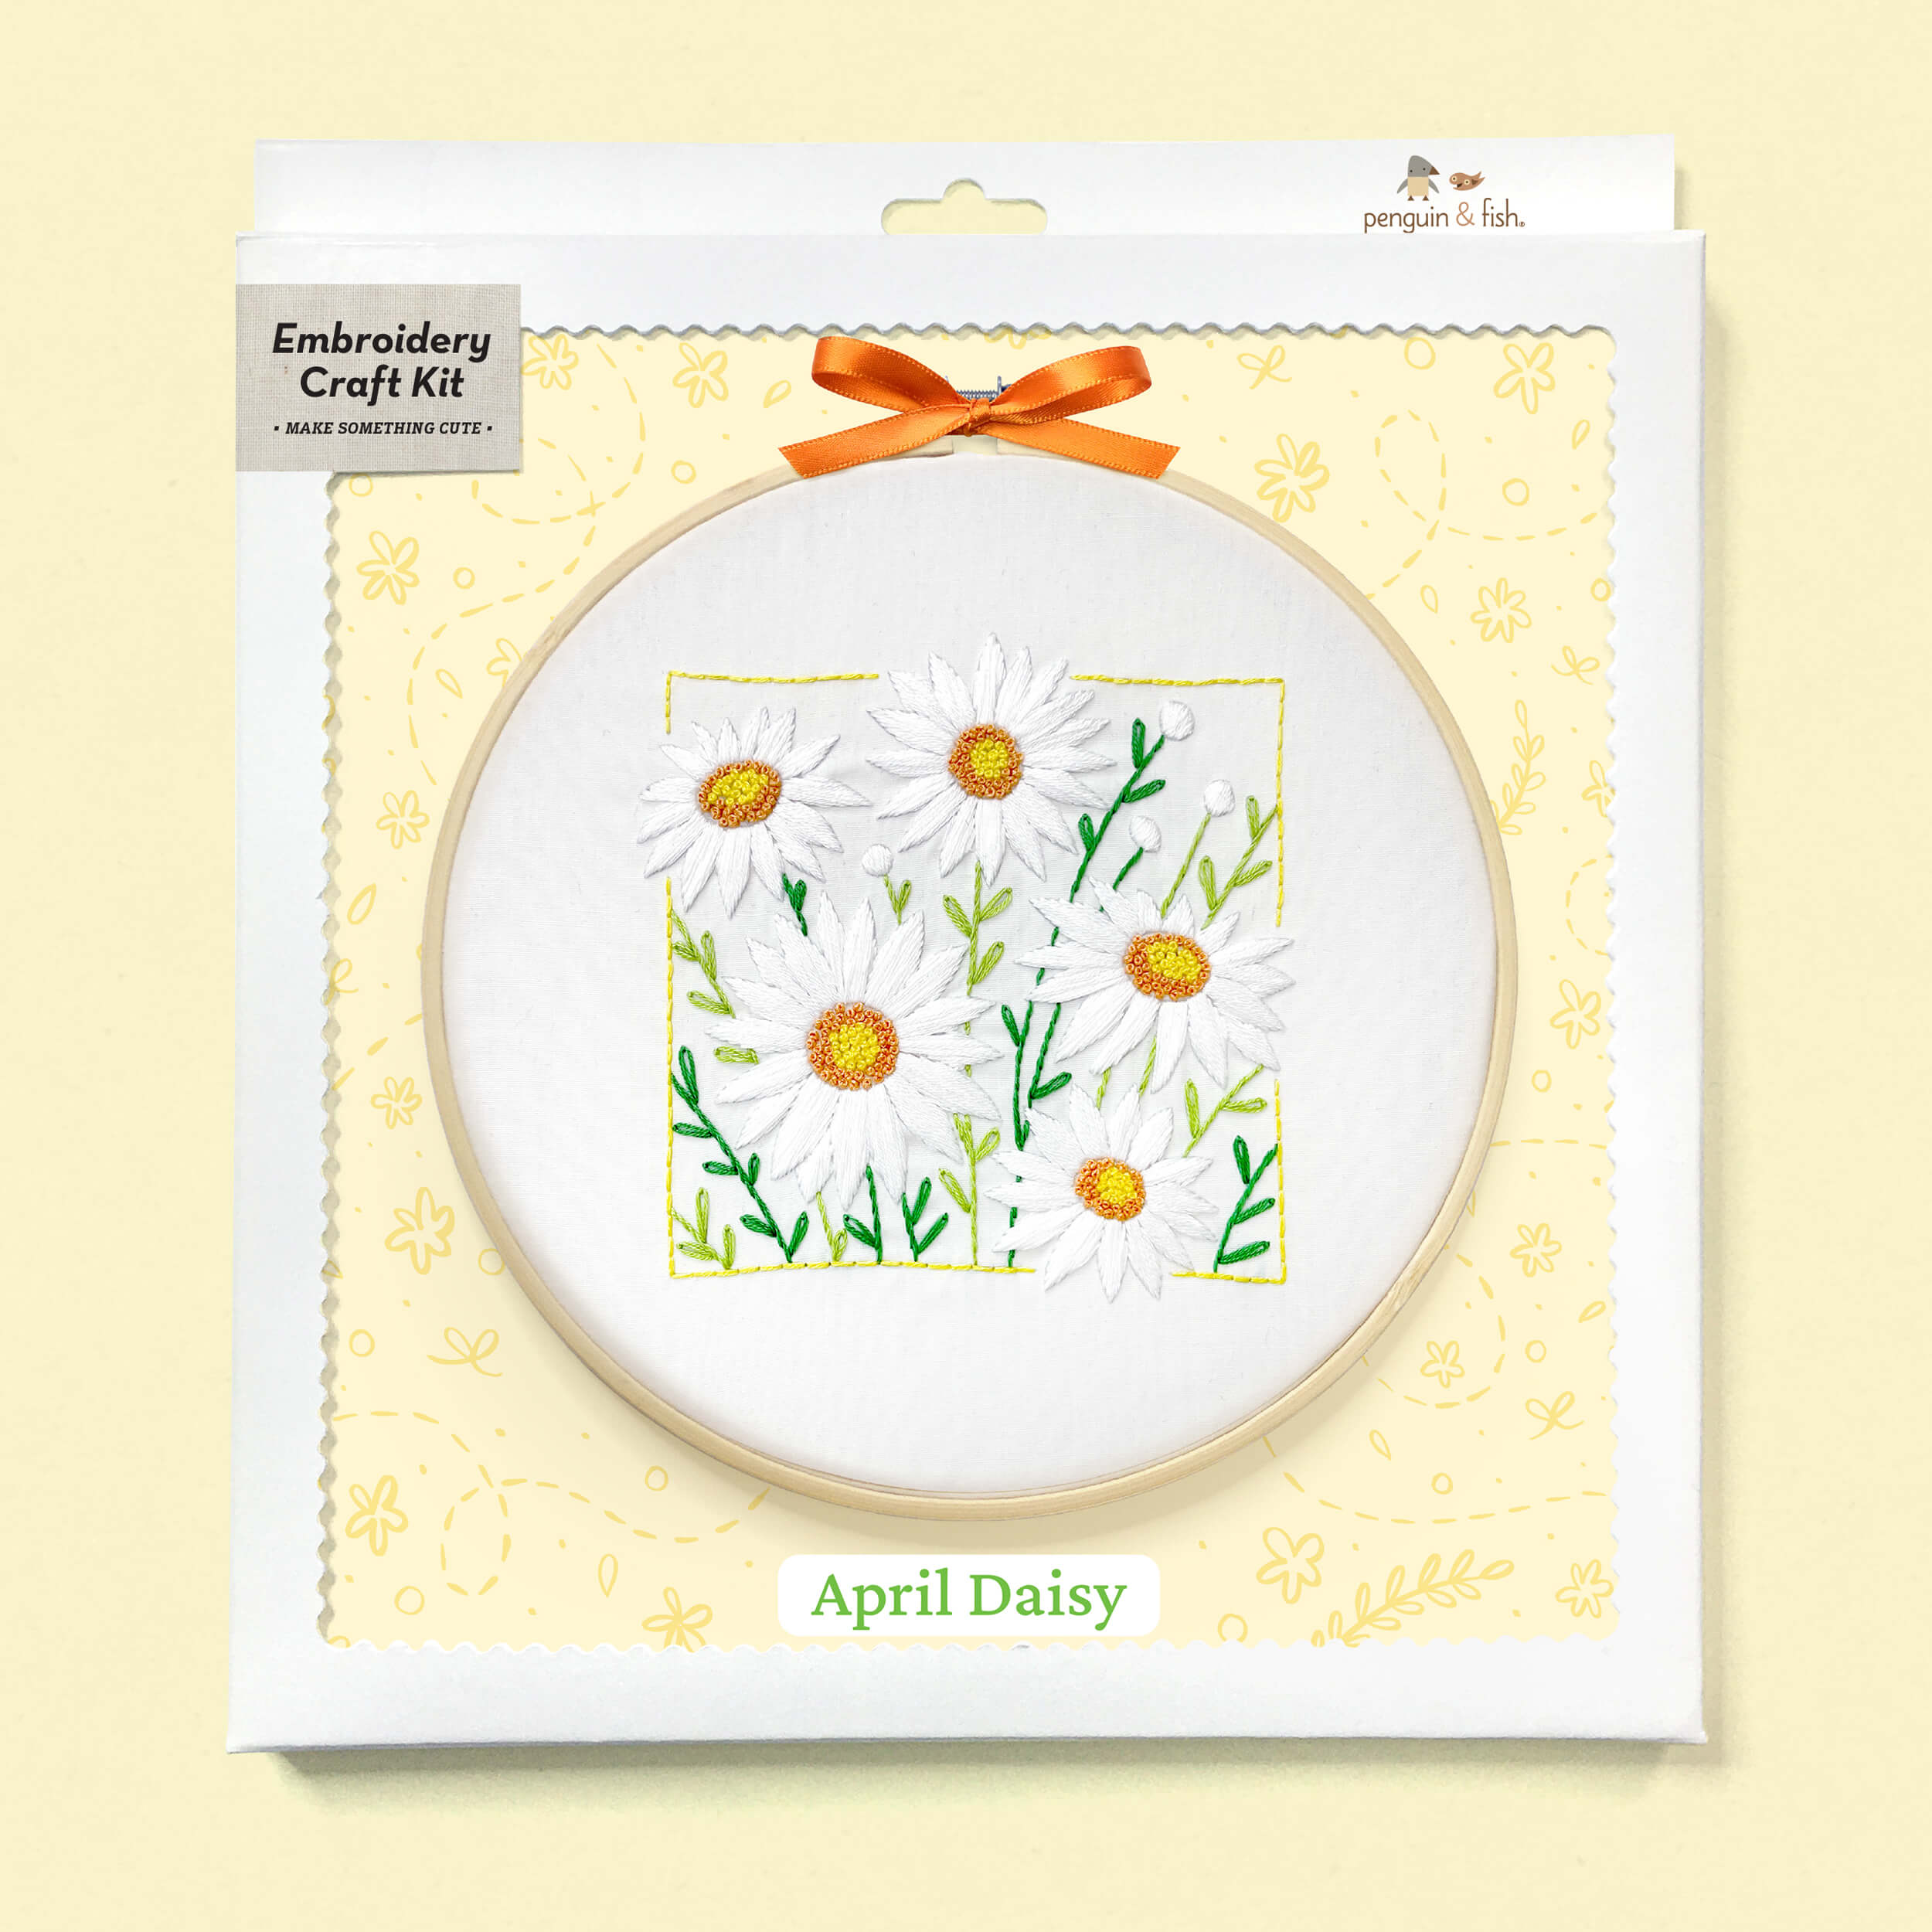 April Daisy embroidery kit in a box